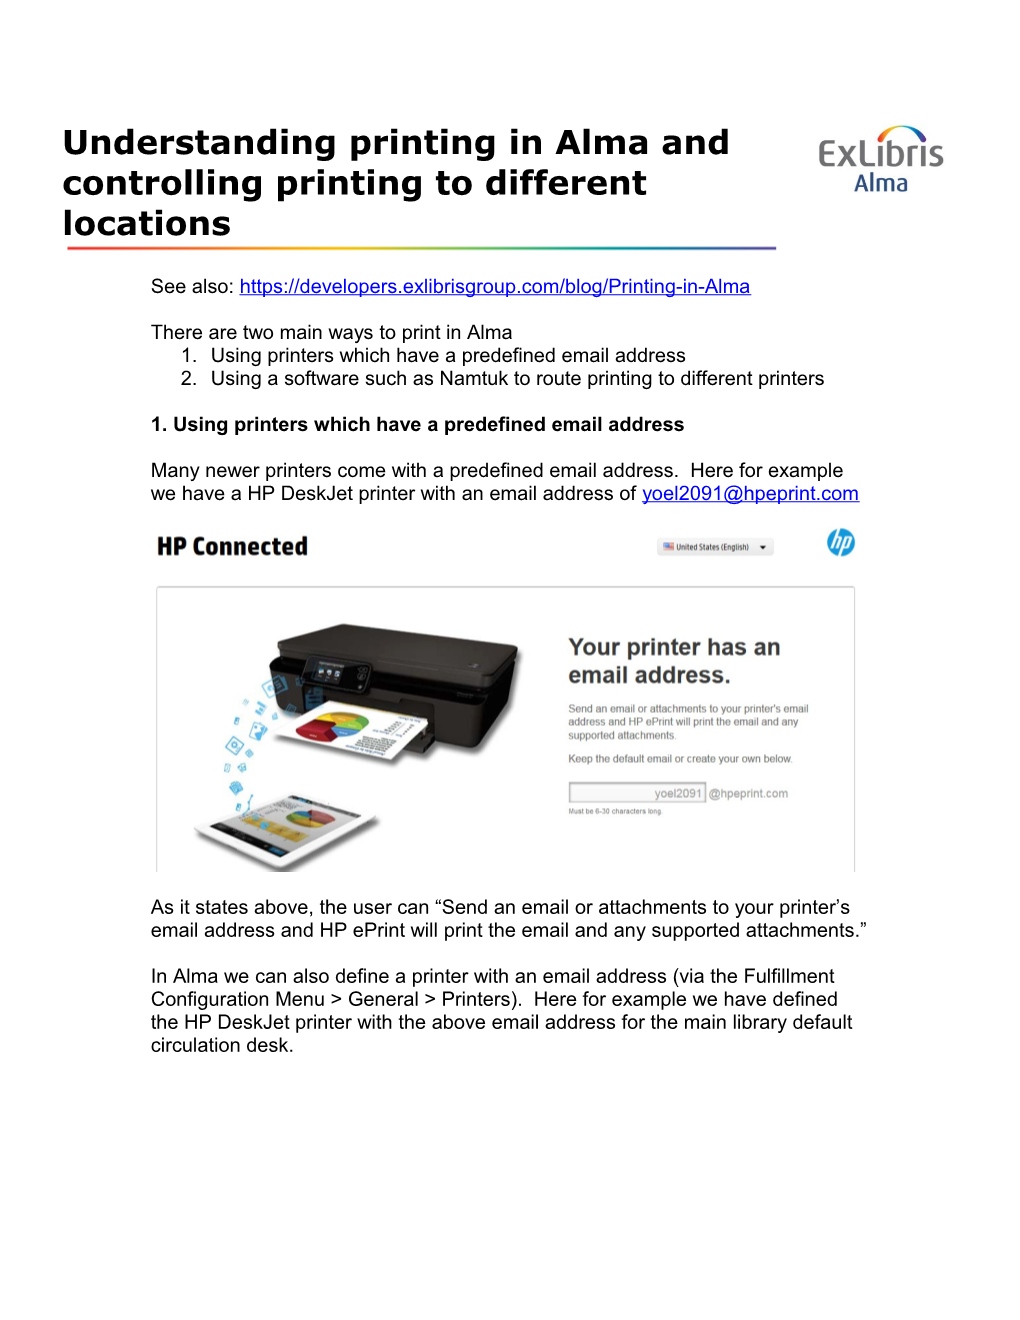 There Are Two Main Ways to Print in Alma